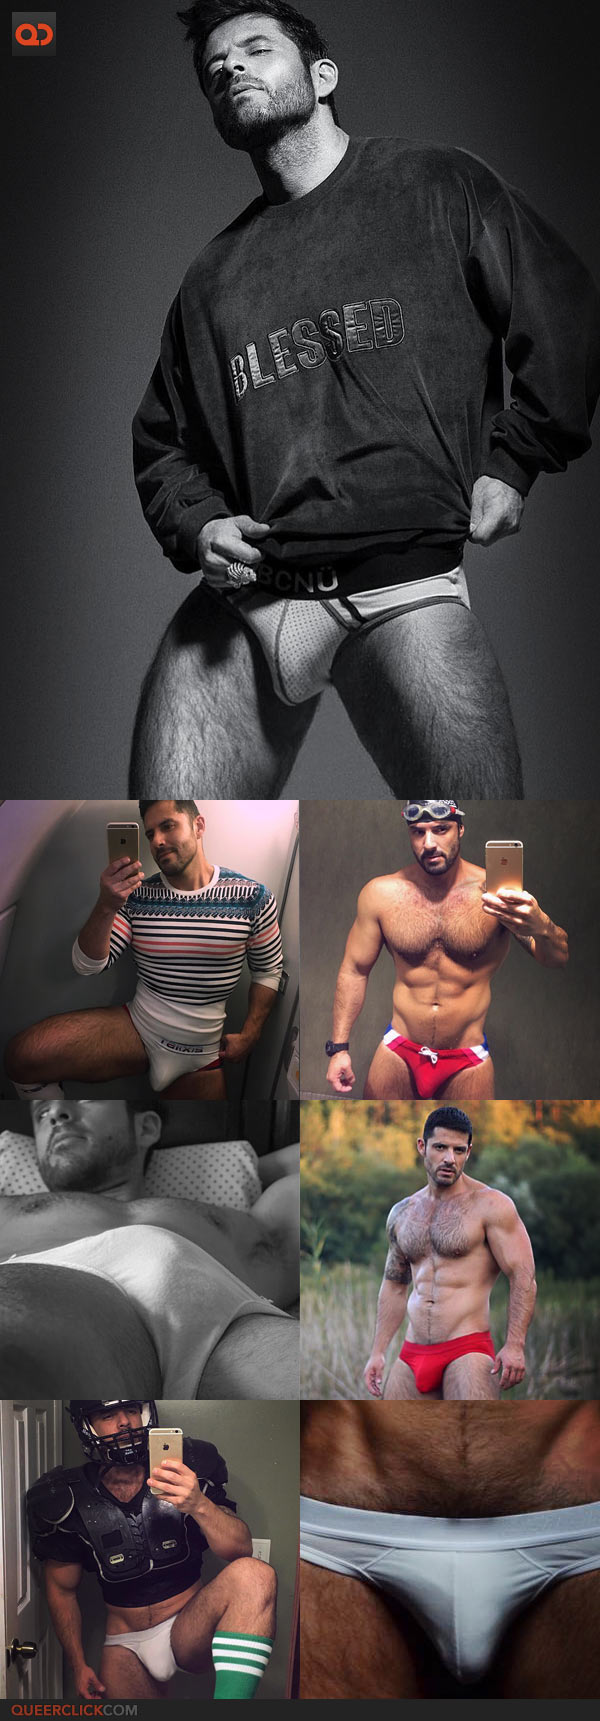 Nine BULGEtastic Fitness Models You Need To Follow On Instagram! - Part 2